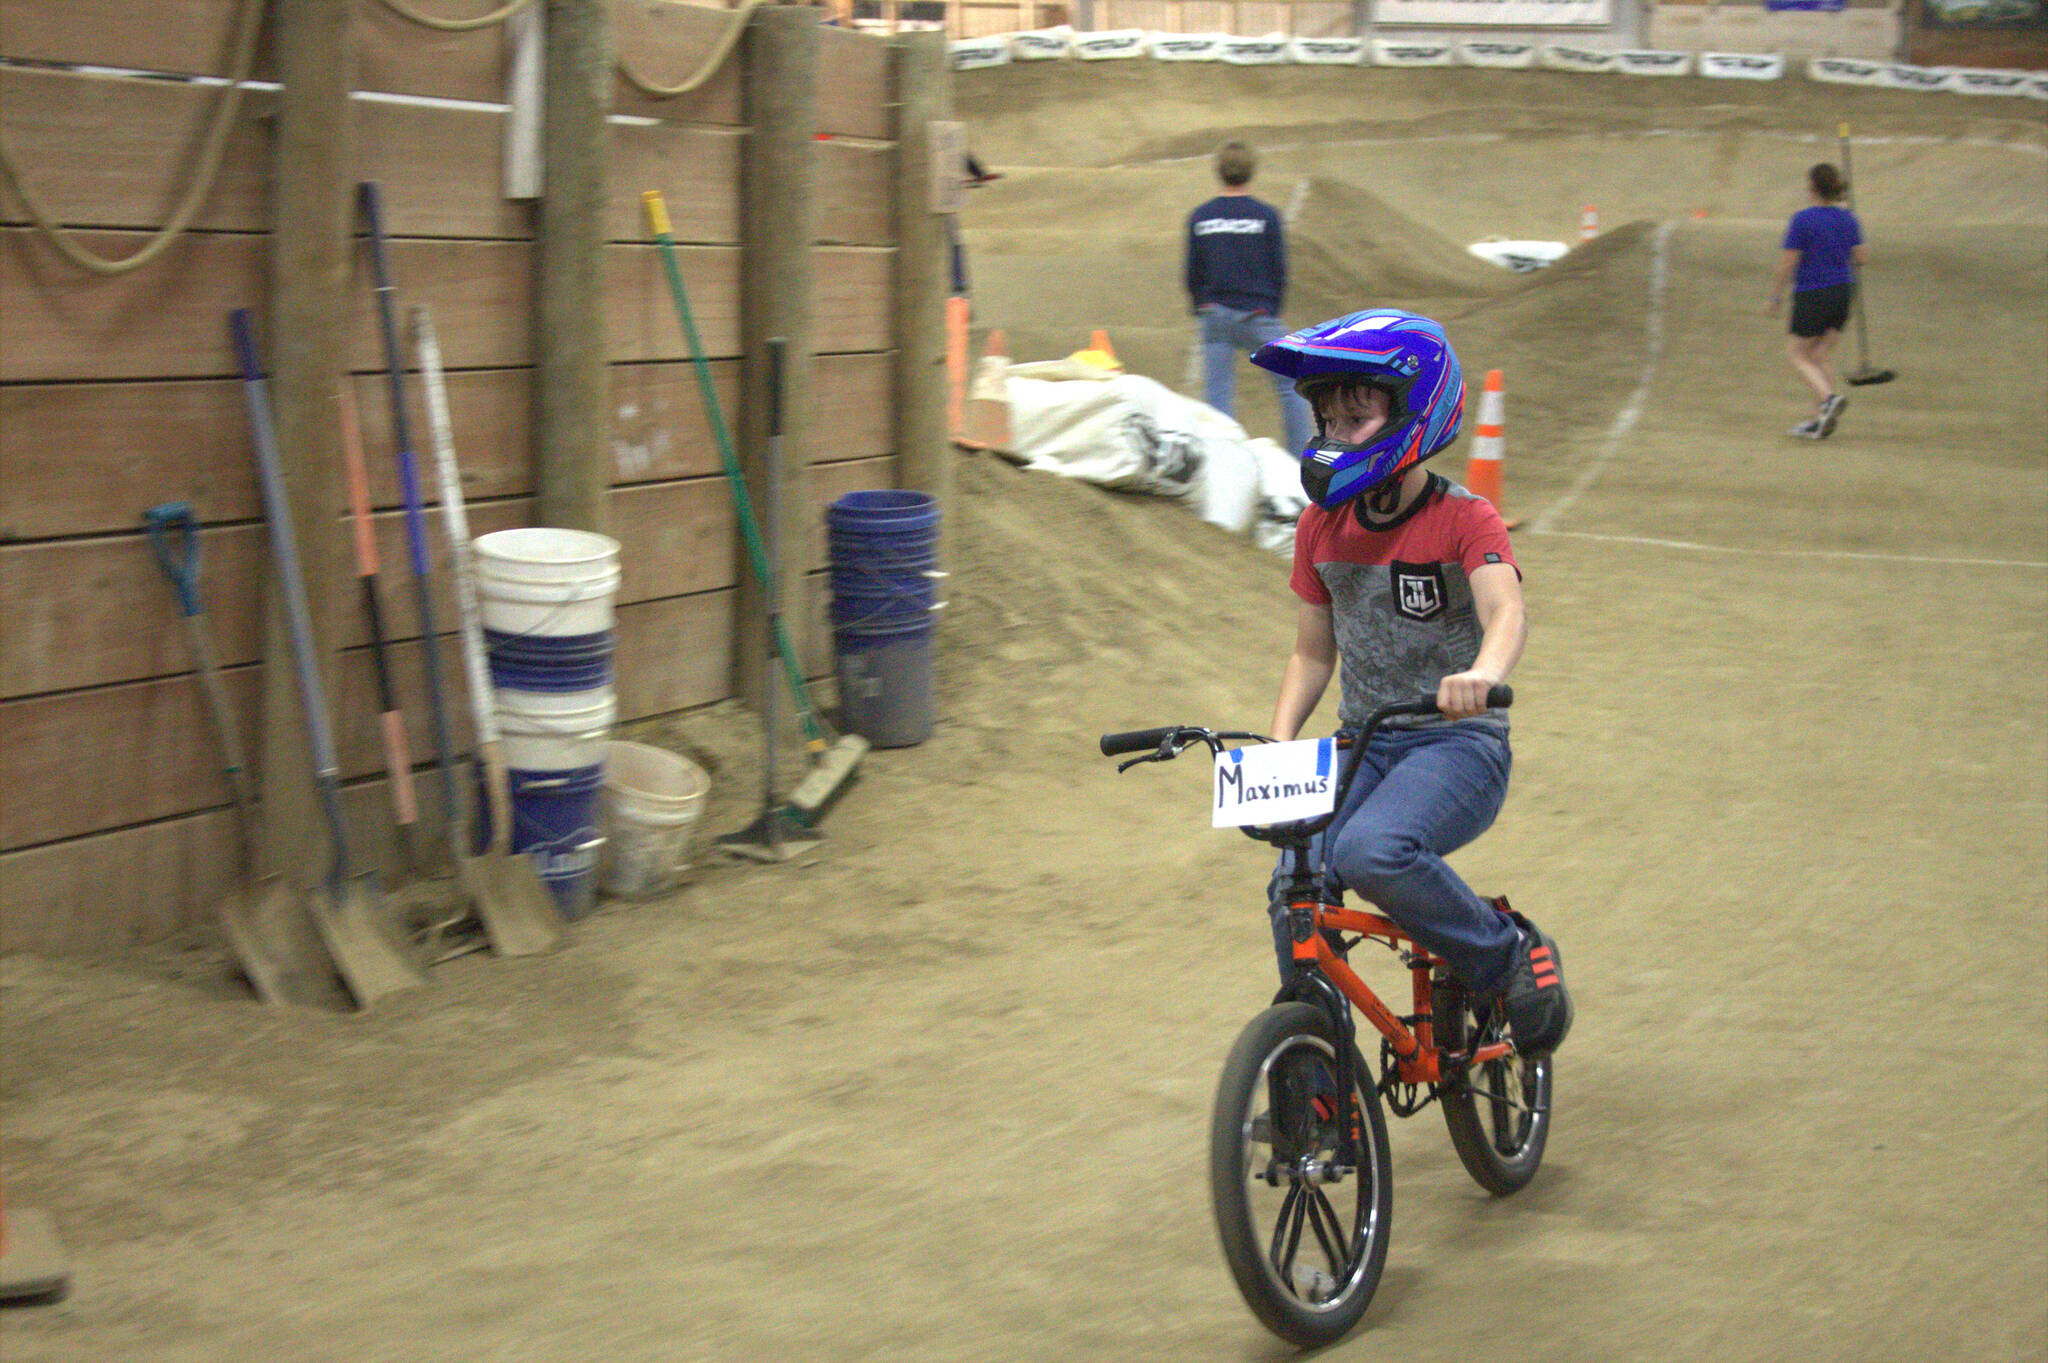 One young rider crosses the finish line after successfully completing a lap.